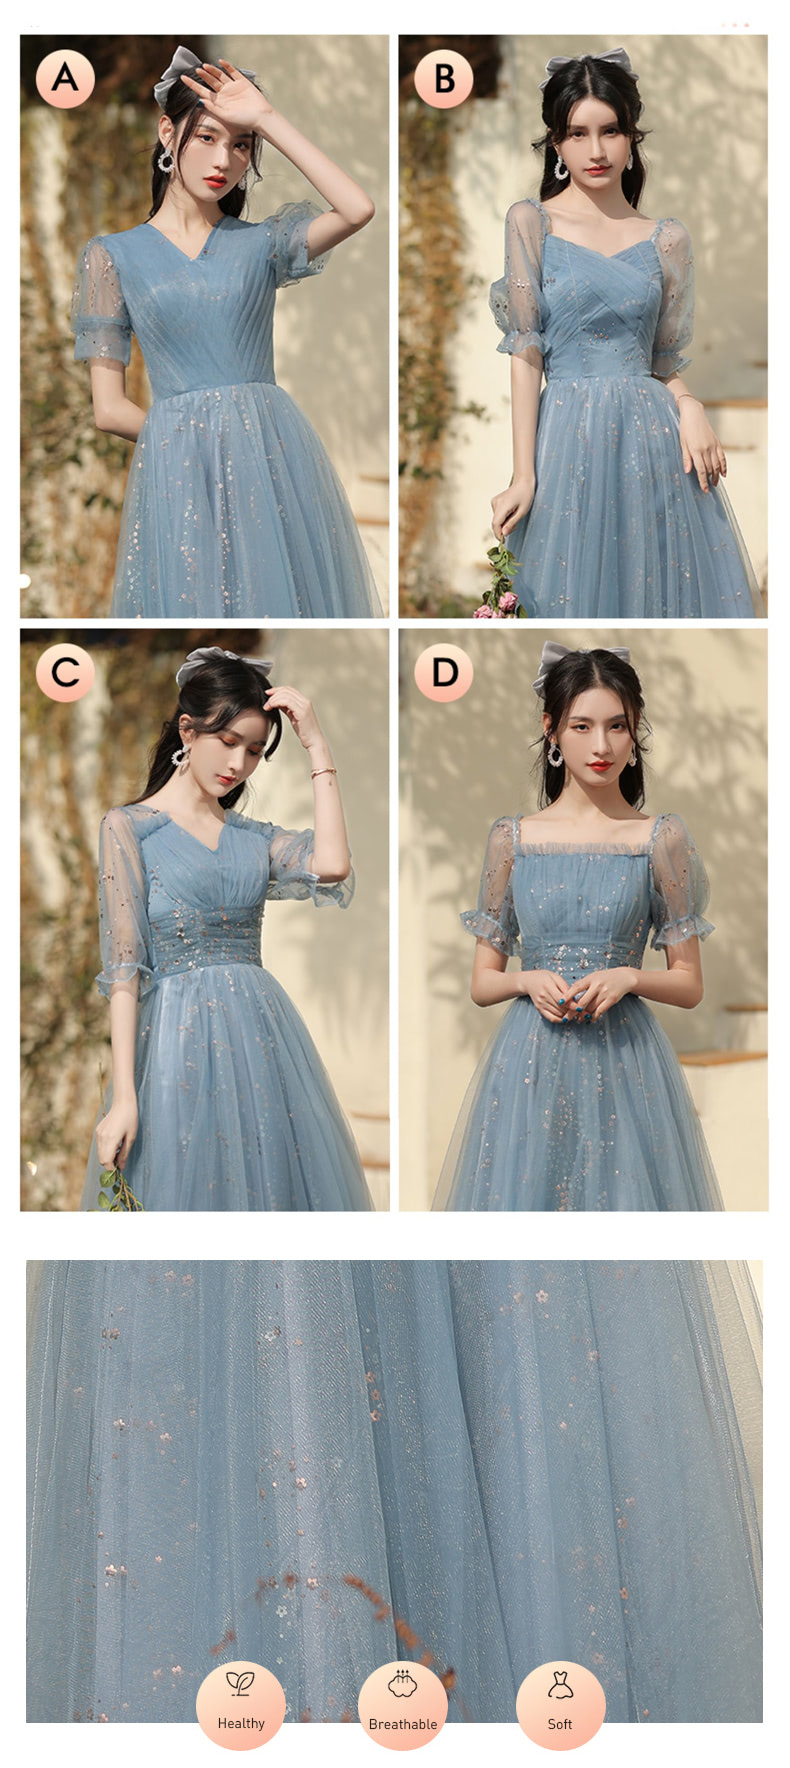 Blue-Bridesmaid-Dress-Wedding-Female-Guest-Gown-with-4-Styles14.jpg